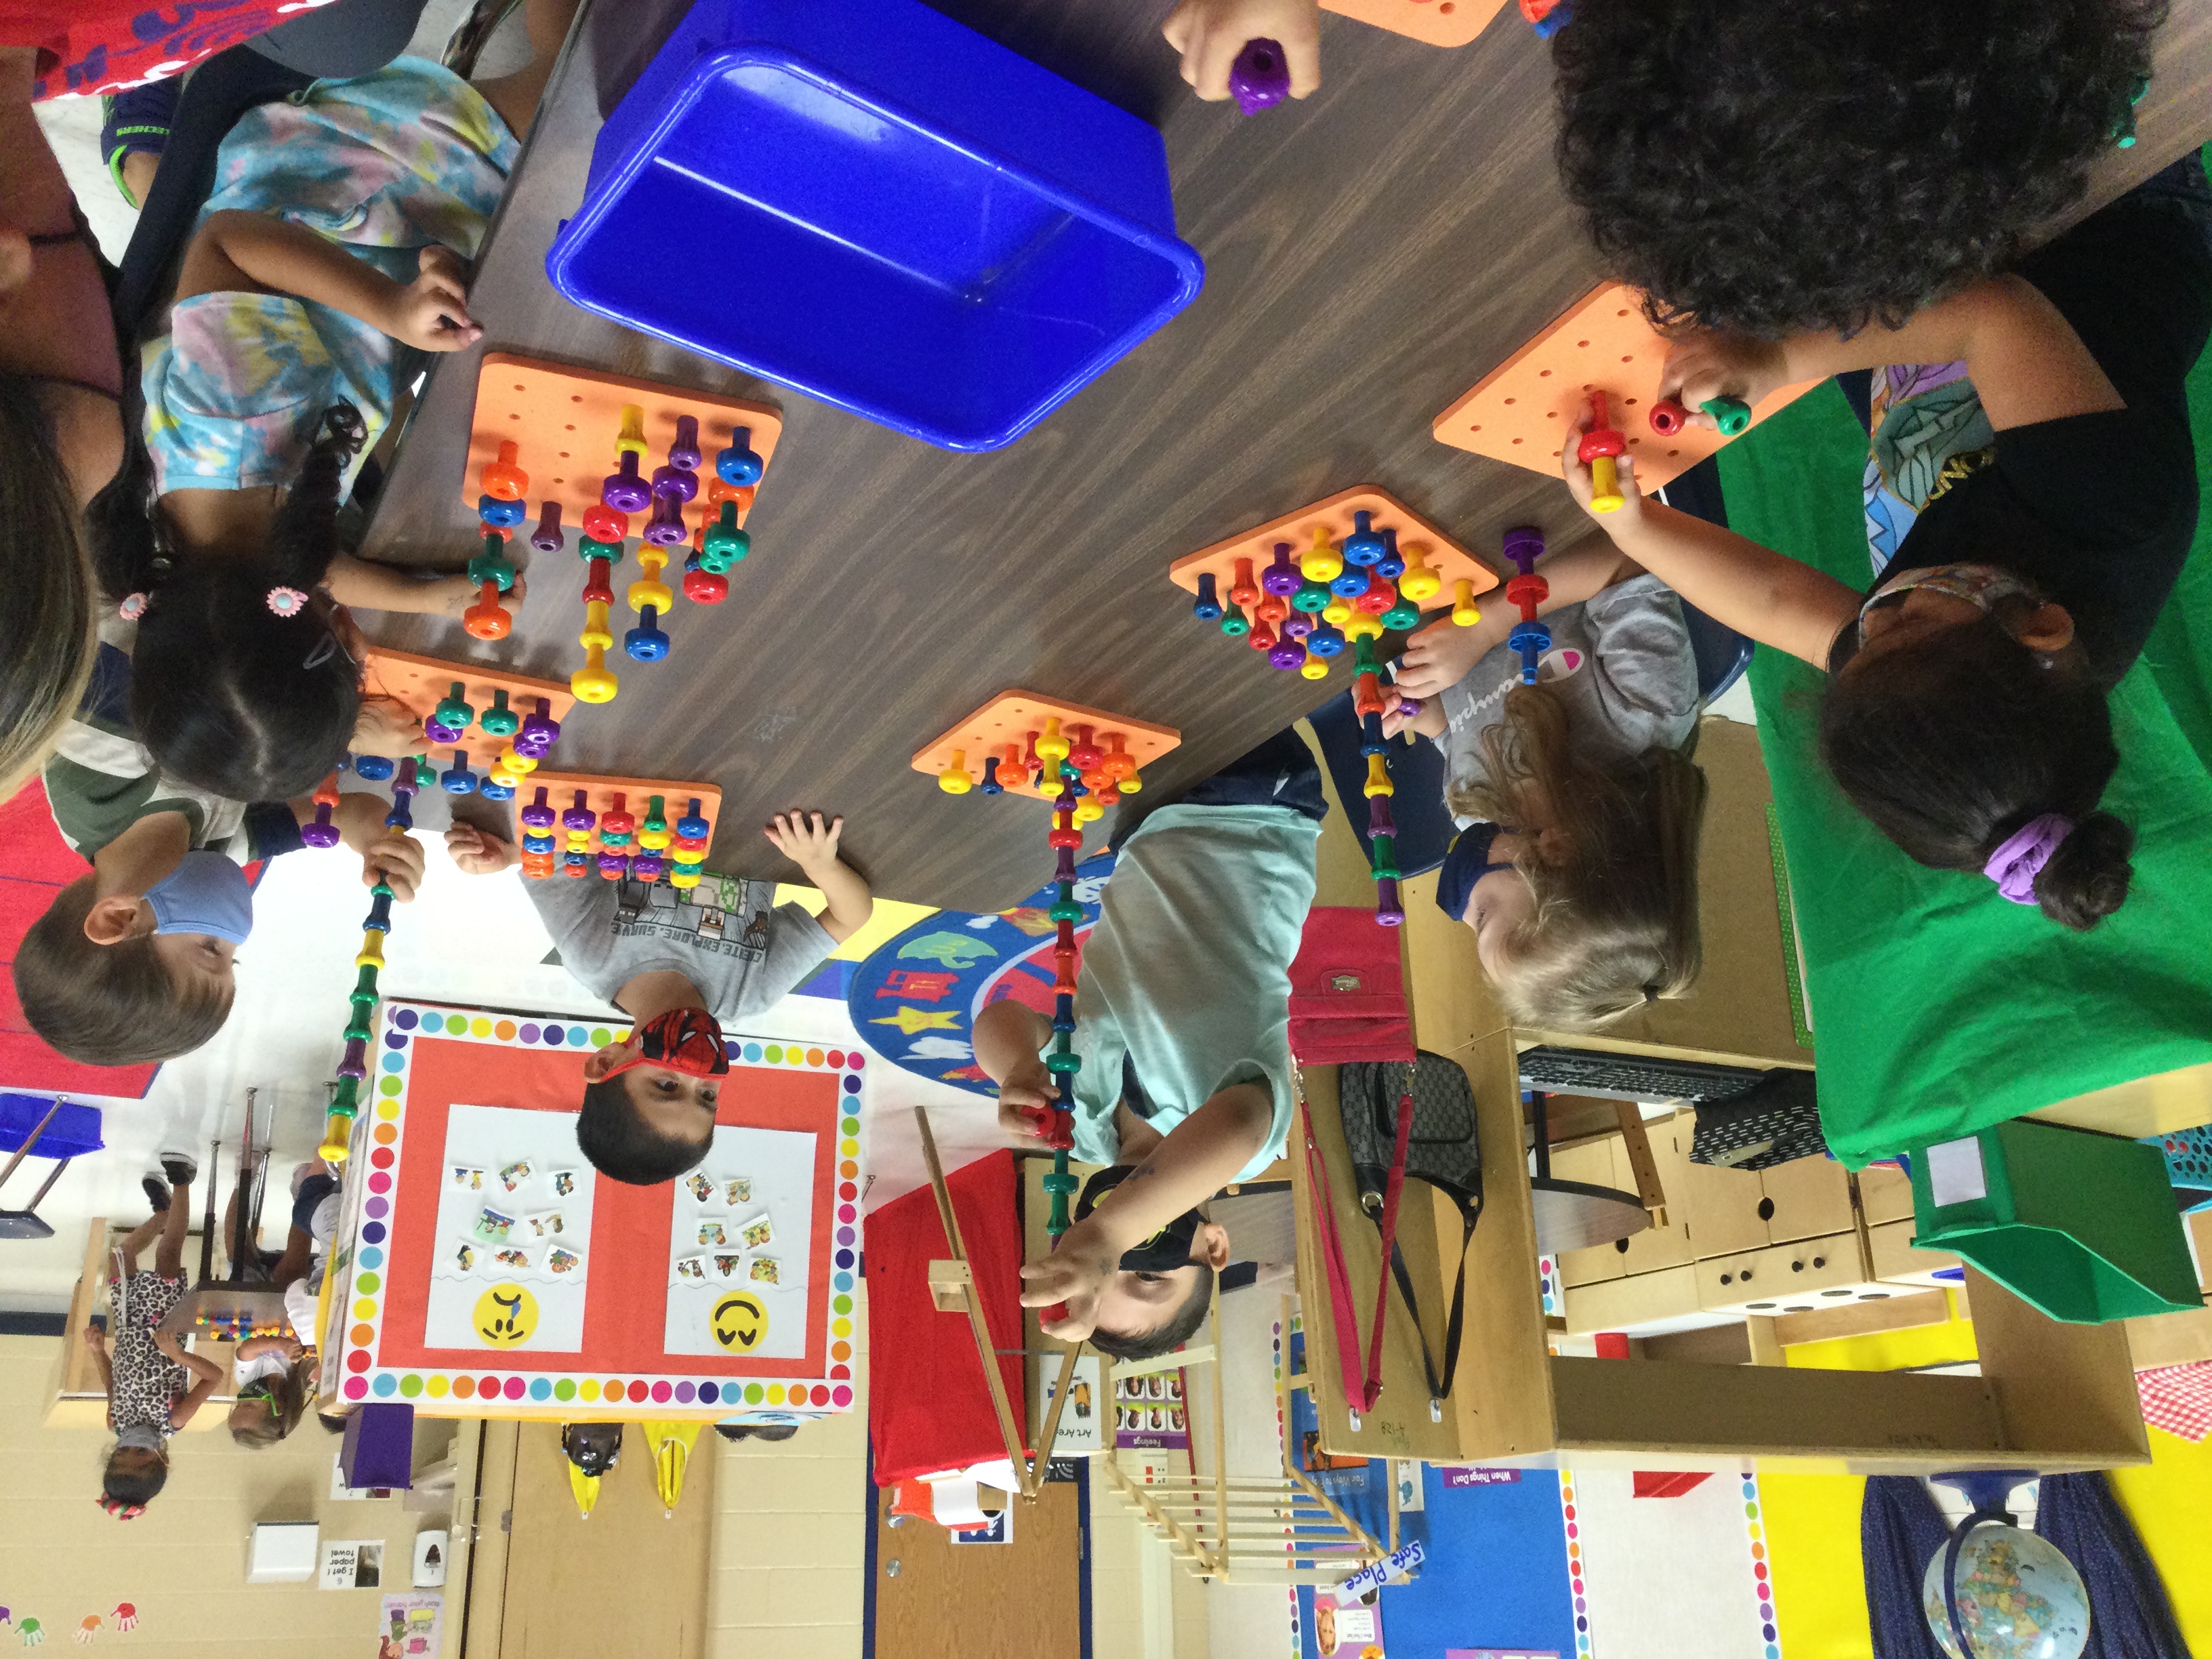 Students playing with Blocks